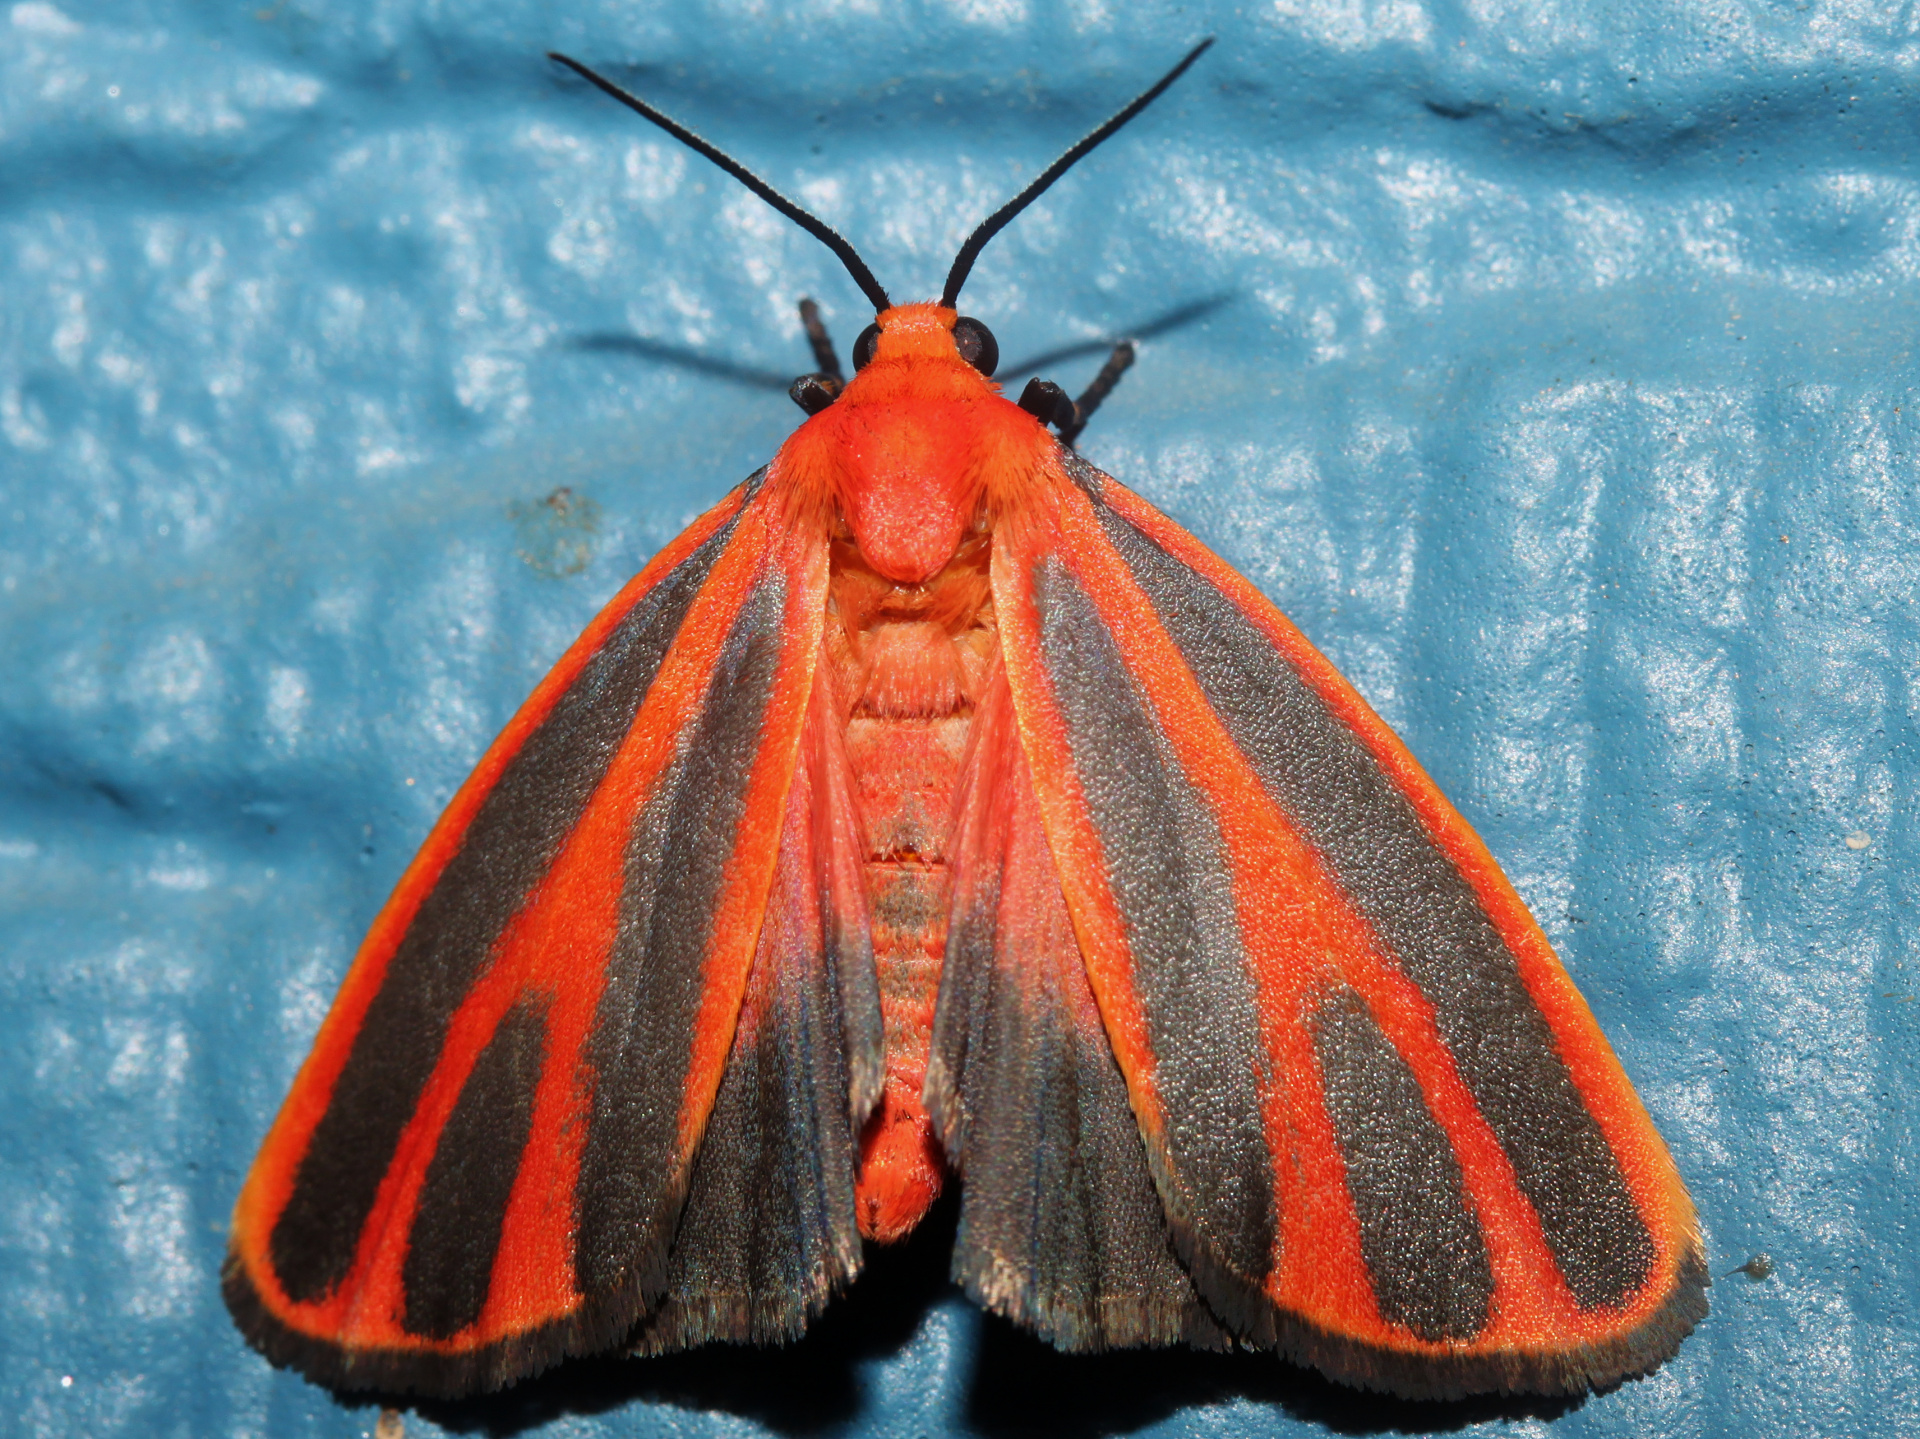 Hypoprepia miniata (Travels » US Trip 3: The Roads Not Taken » Animals » Insects » Butterfies and Moths » Arctiidae)